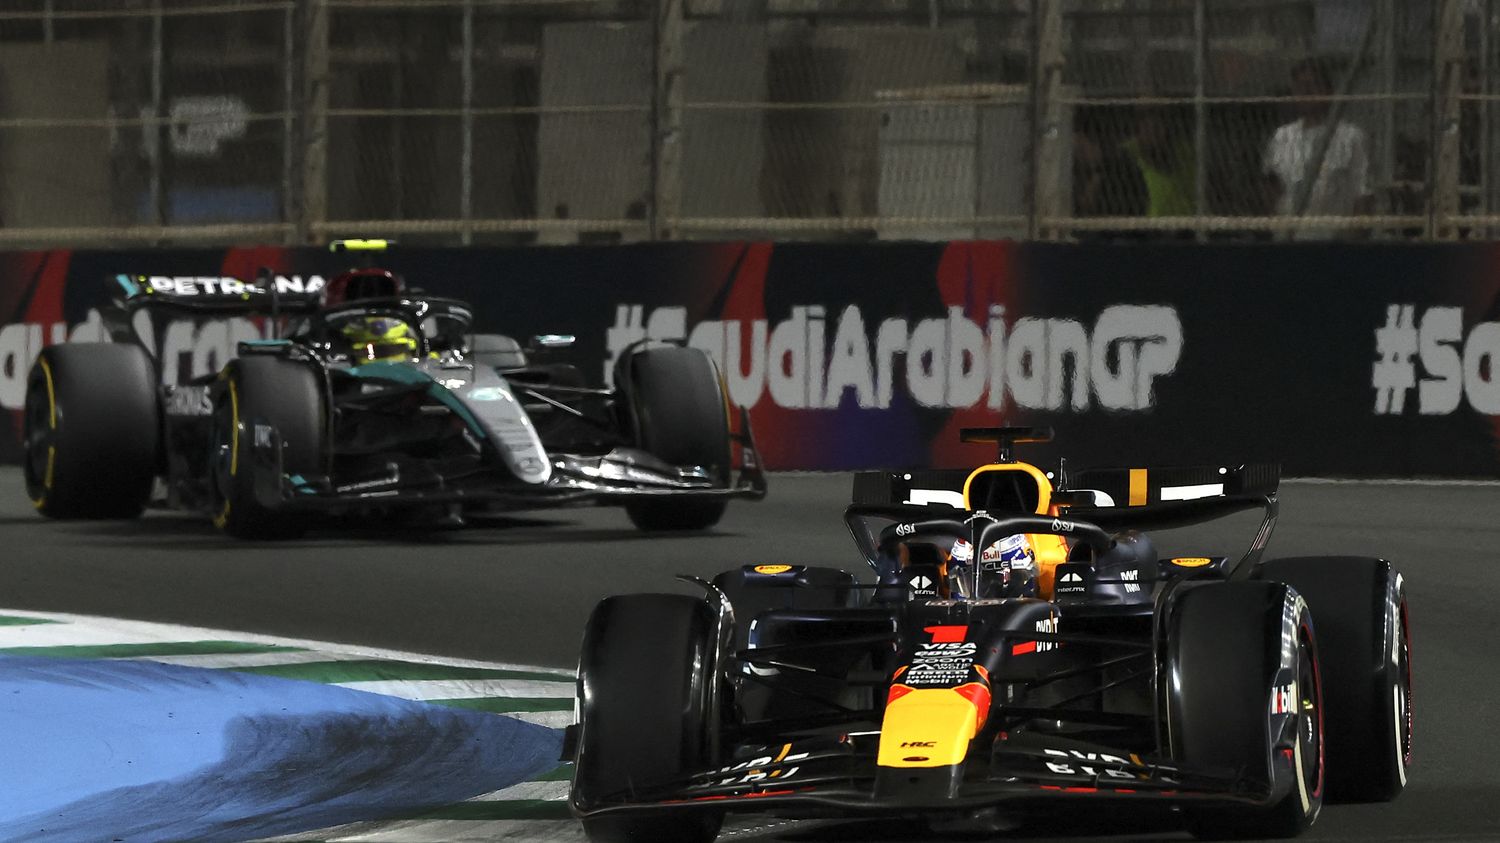 F1: Max Verstappen unbeaten at Saudi Grand Prix, another double for Red Bull